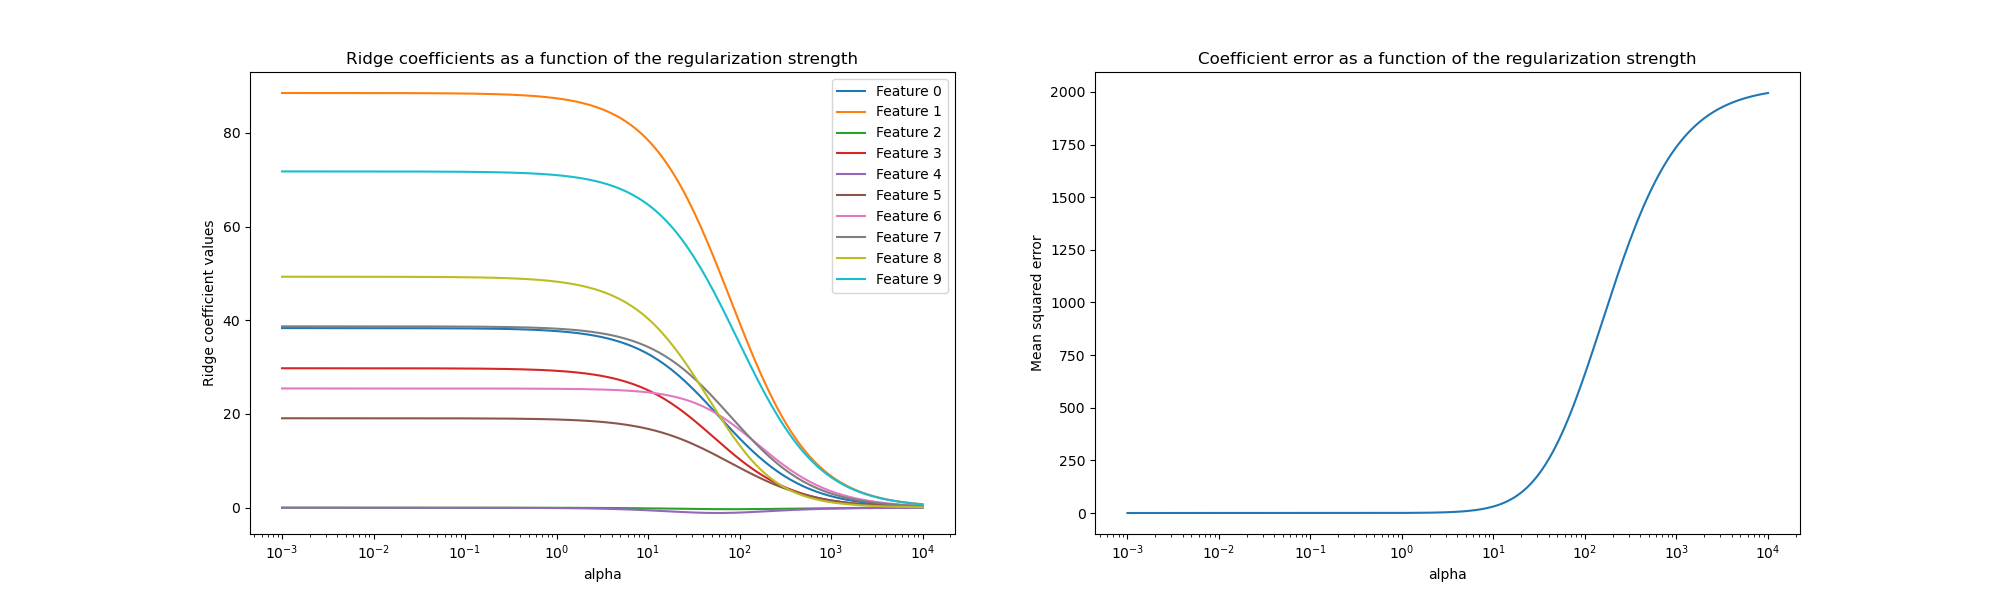 Ridge coefficients as a function of the regularization strength, Coefficient error as a function of the regularization strength